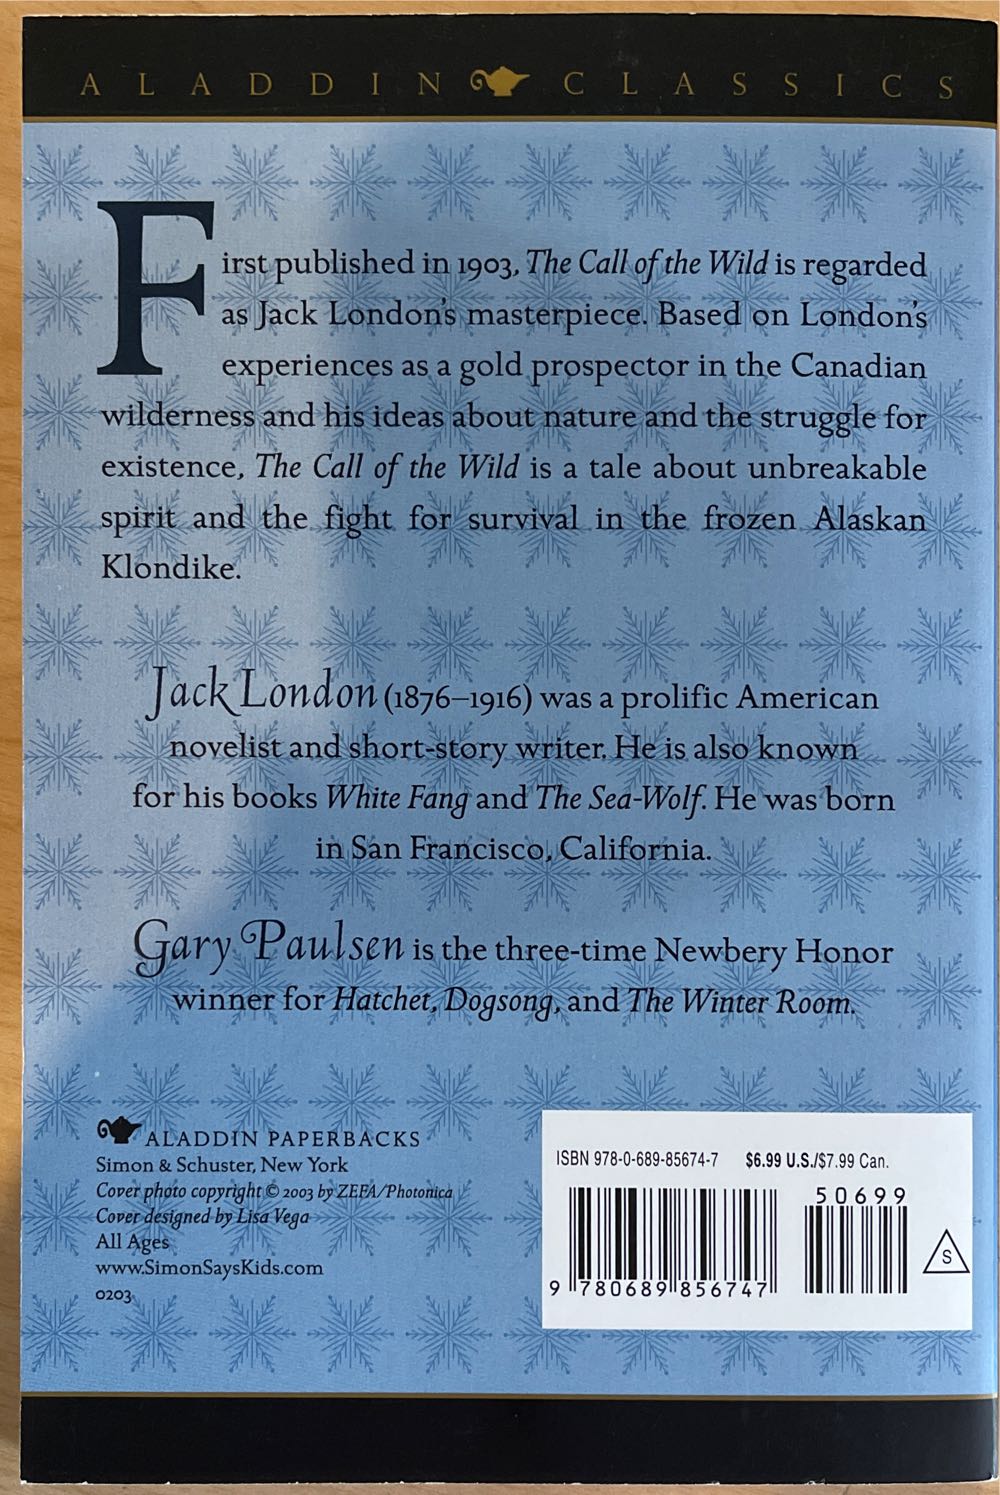 The Call of the Wild - Jack London (Aladdin - Trade Paperback) book collectible [Barcode 9780689856747] - Main Image 2